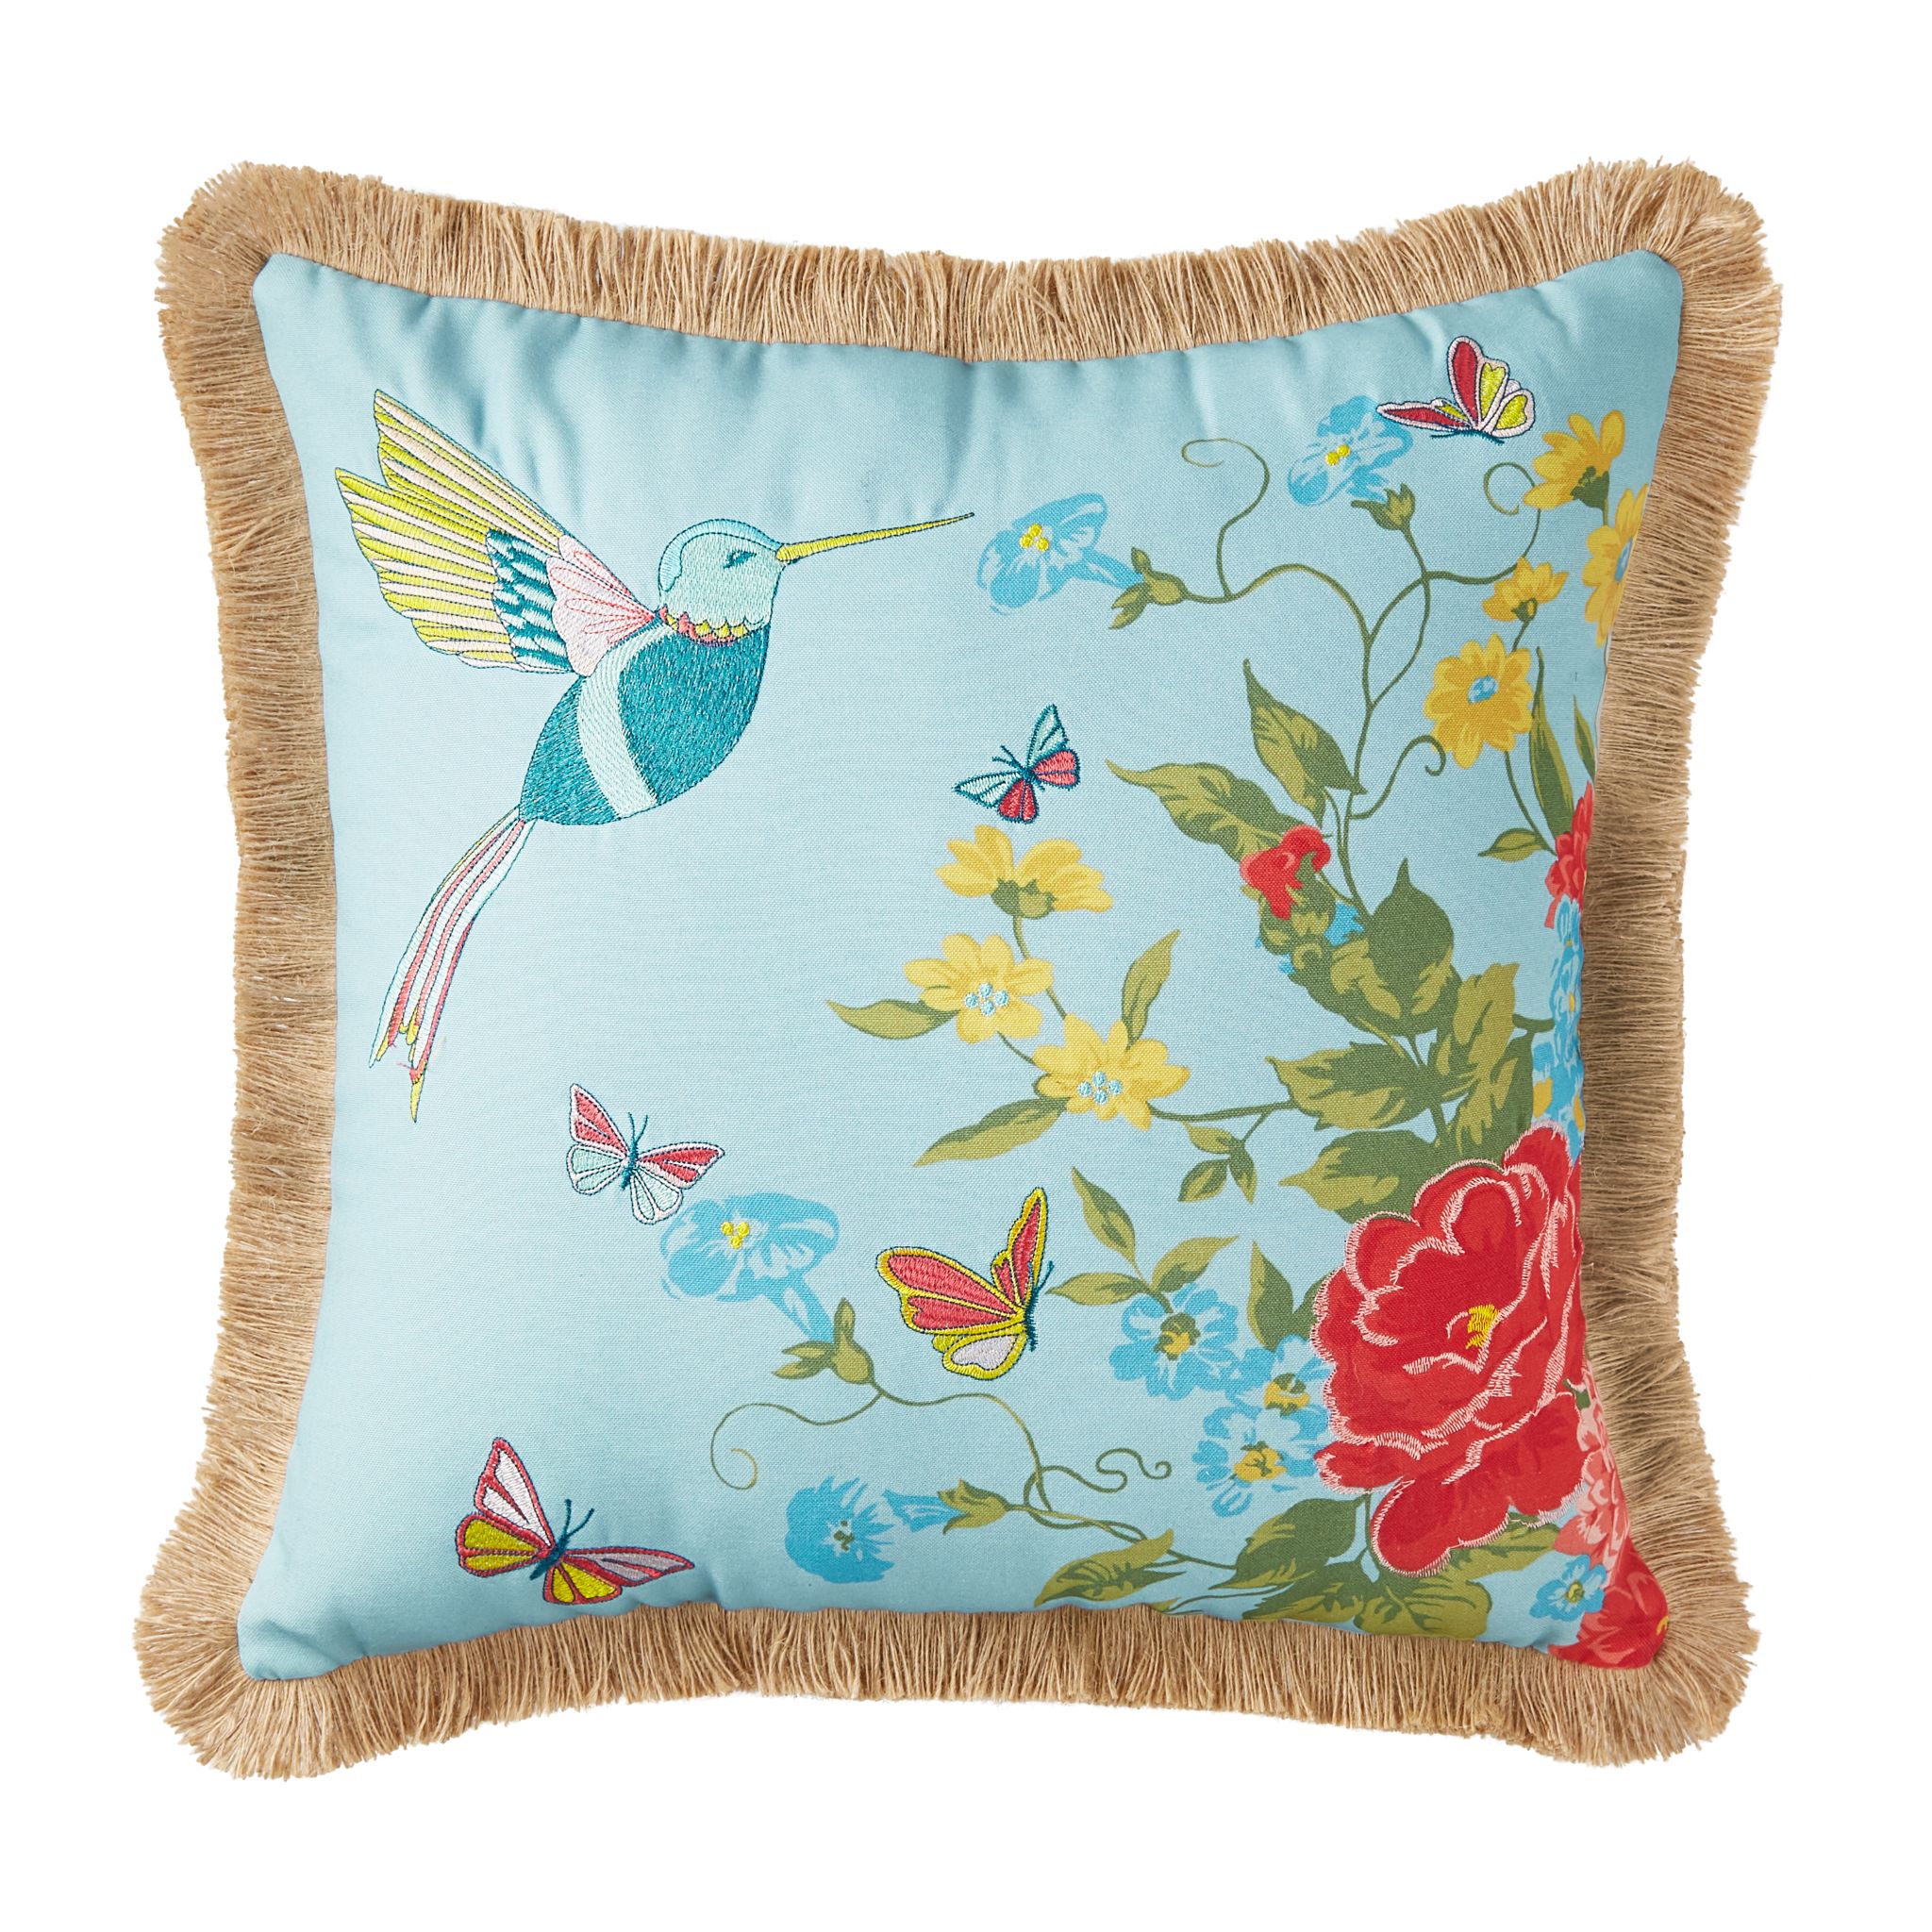 The Pioneer Woman Sweet Rose Embroidered Bird Outdoor Pillow, 20" x 20" - image 1 of 6